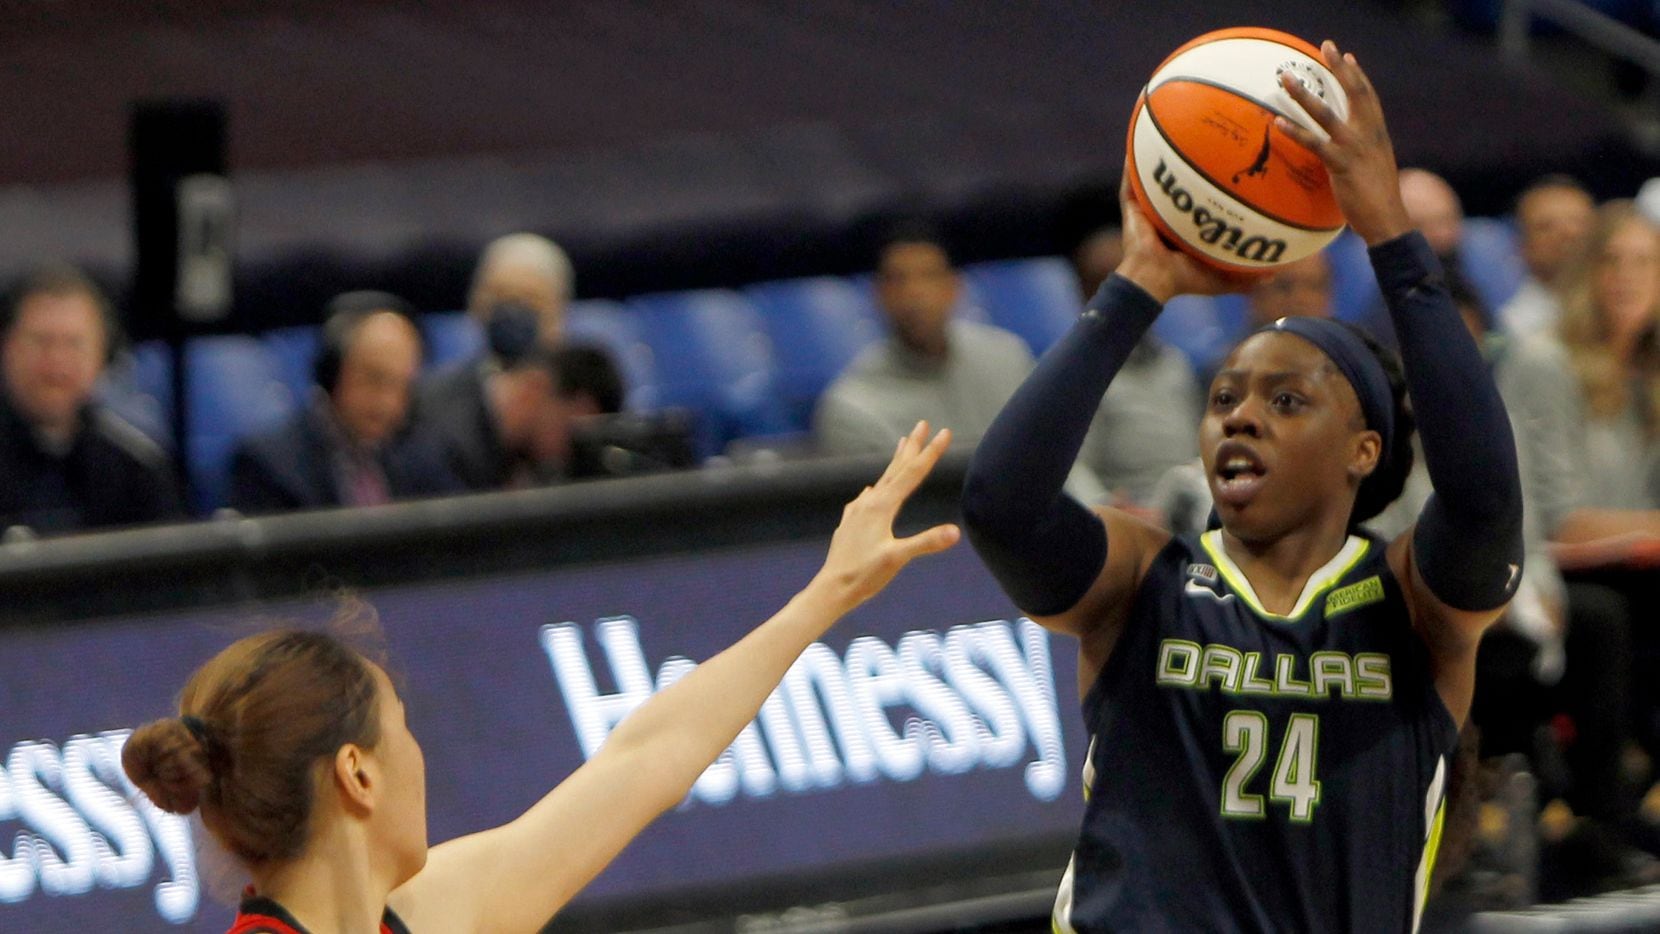 Dallas Wings guard Arike Ogunbowale (24) puts up a jump shot over the defense of Las Vegas center JiSu Park (19) during second half action. Las Vegas defeated Dallas 95-79. The two WNBA teams played their game at College Park Center on the campus of UT-Arlington on July 11, 2021. (Steve Hamm/ Special Contributor)